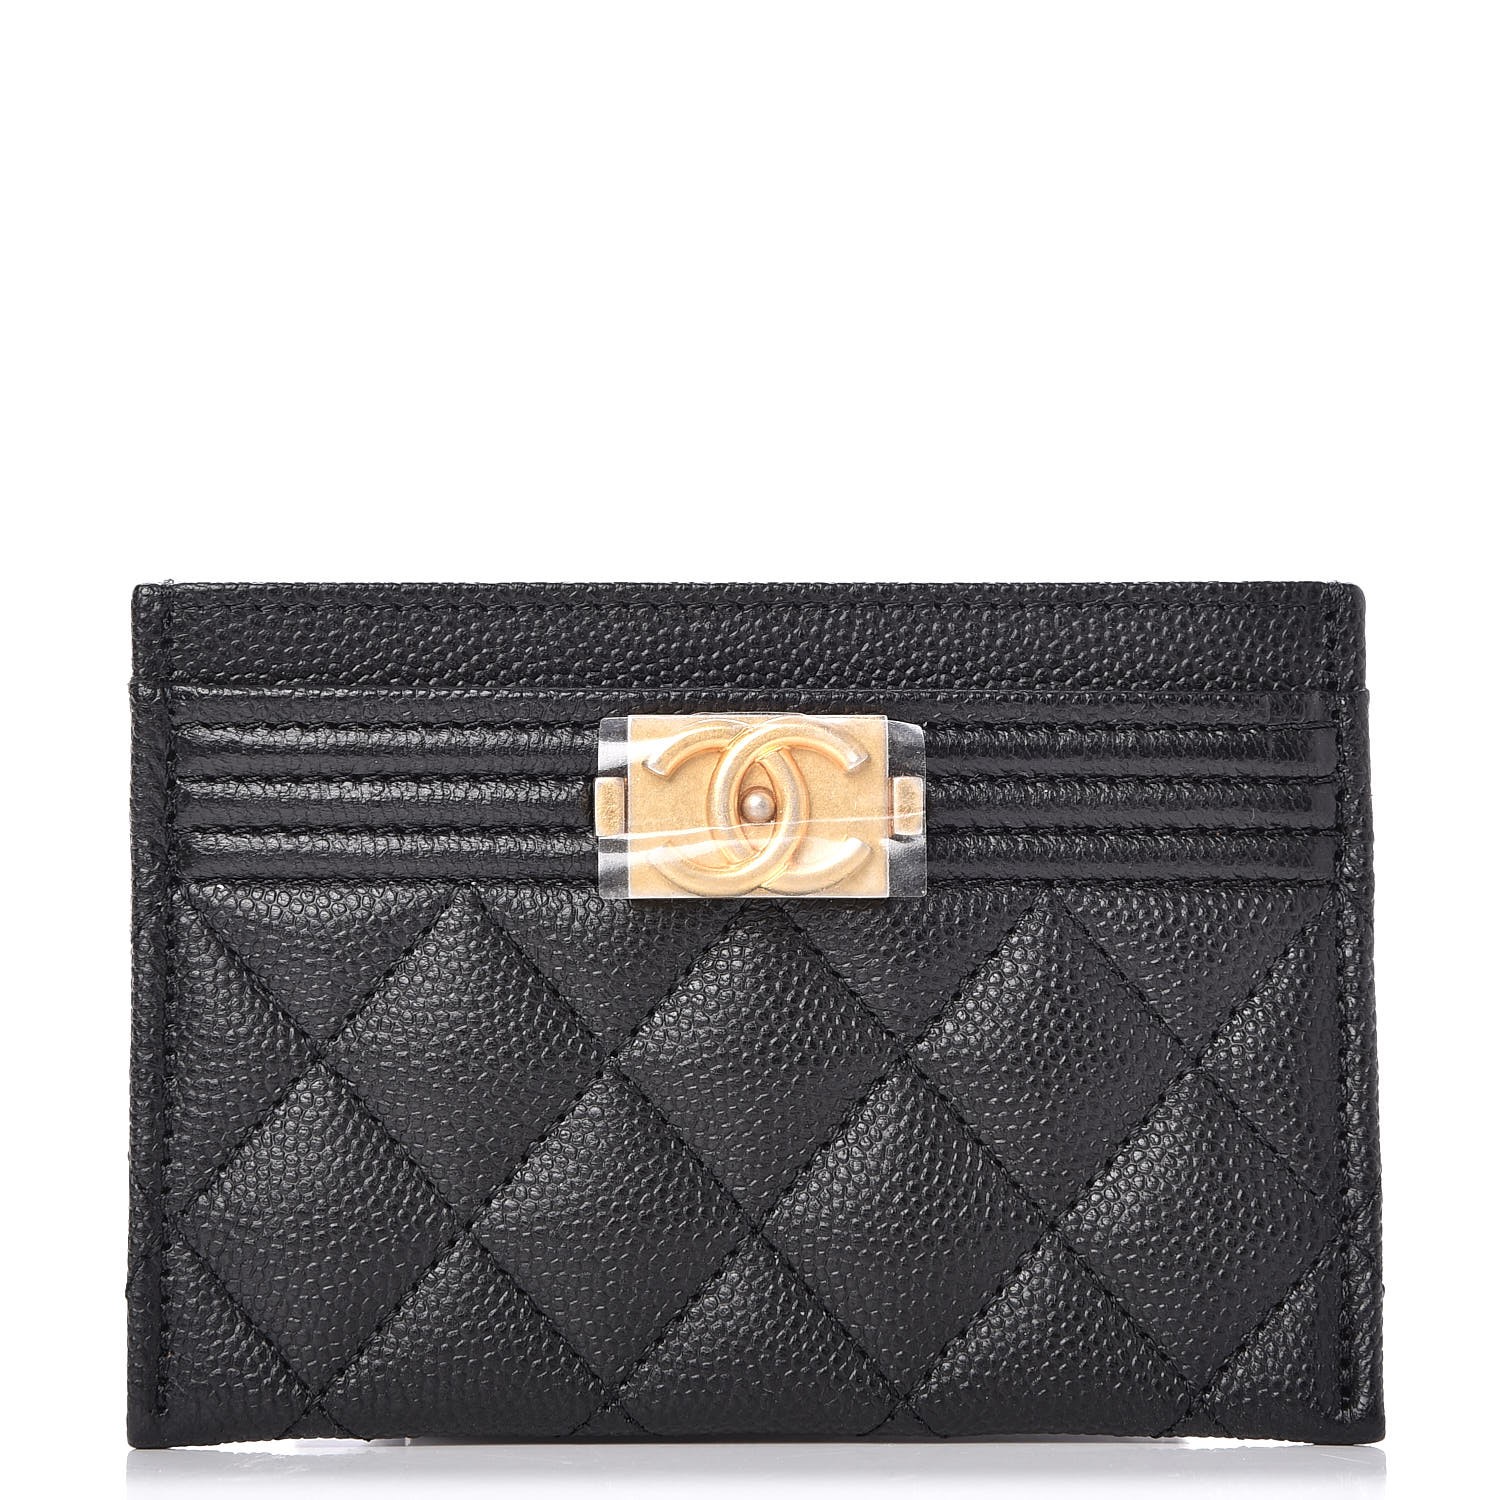 CHANEL Caviar Quilted Boy Card Holder Black 250254